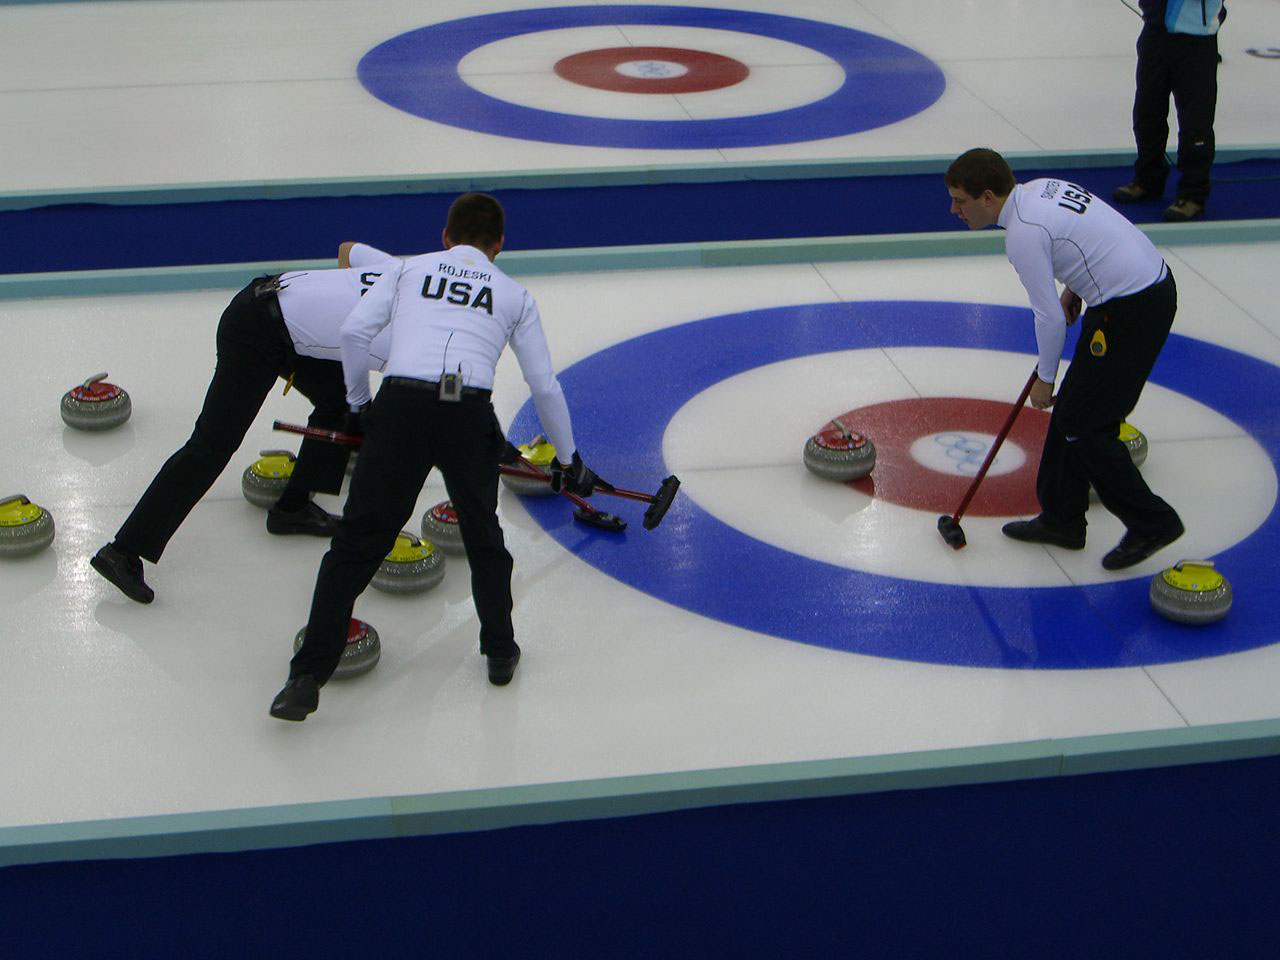 Photo of the US Men's Curling team at the 2006 Winter Olympics in Turin, Italy, taken by Feddar (Own work) [Public domain], via Wikimedia Commons.